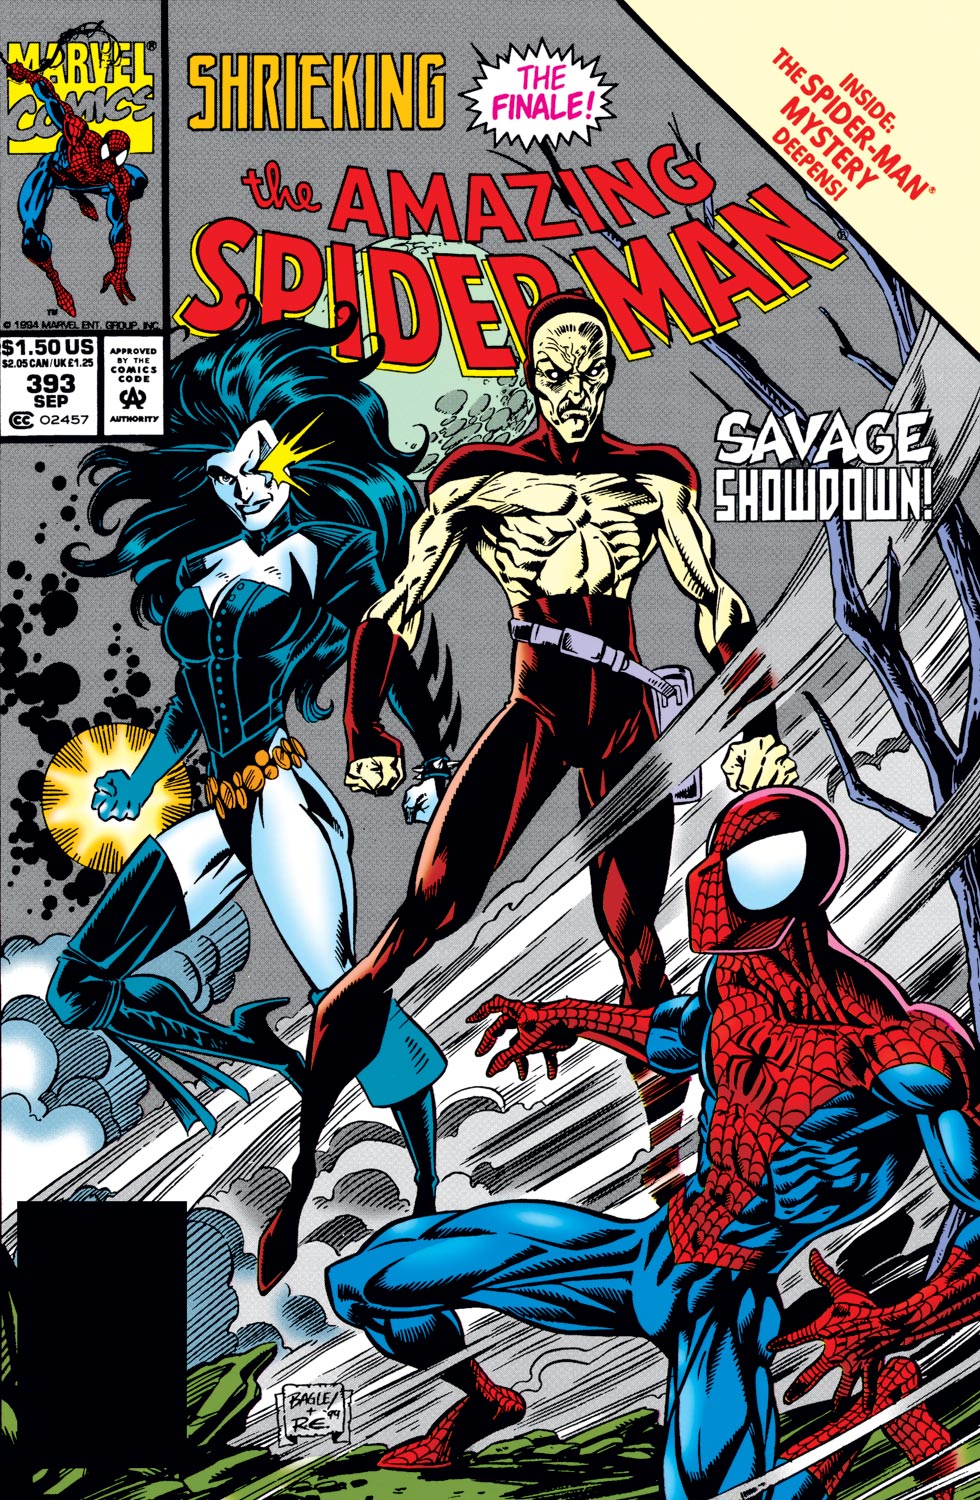 The Amazing Spider-Man (1963) #393 | Comic Issues | Marvel